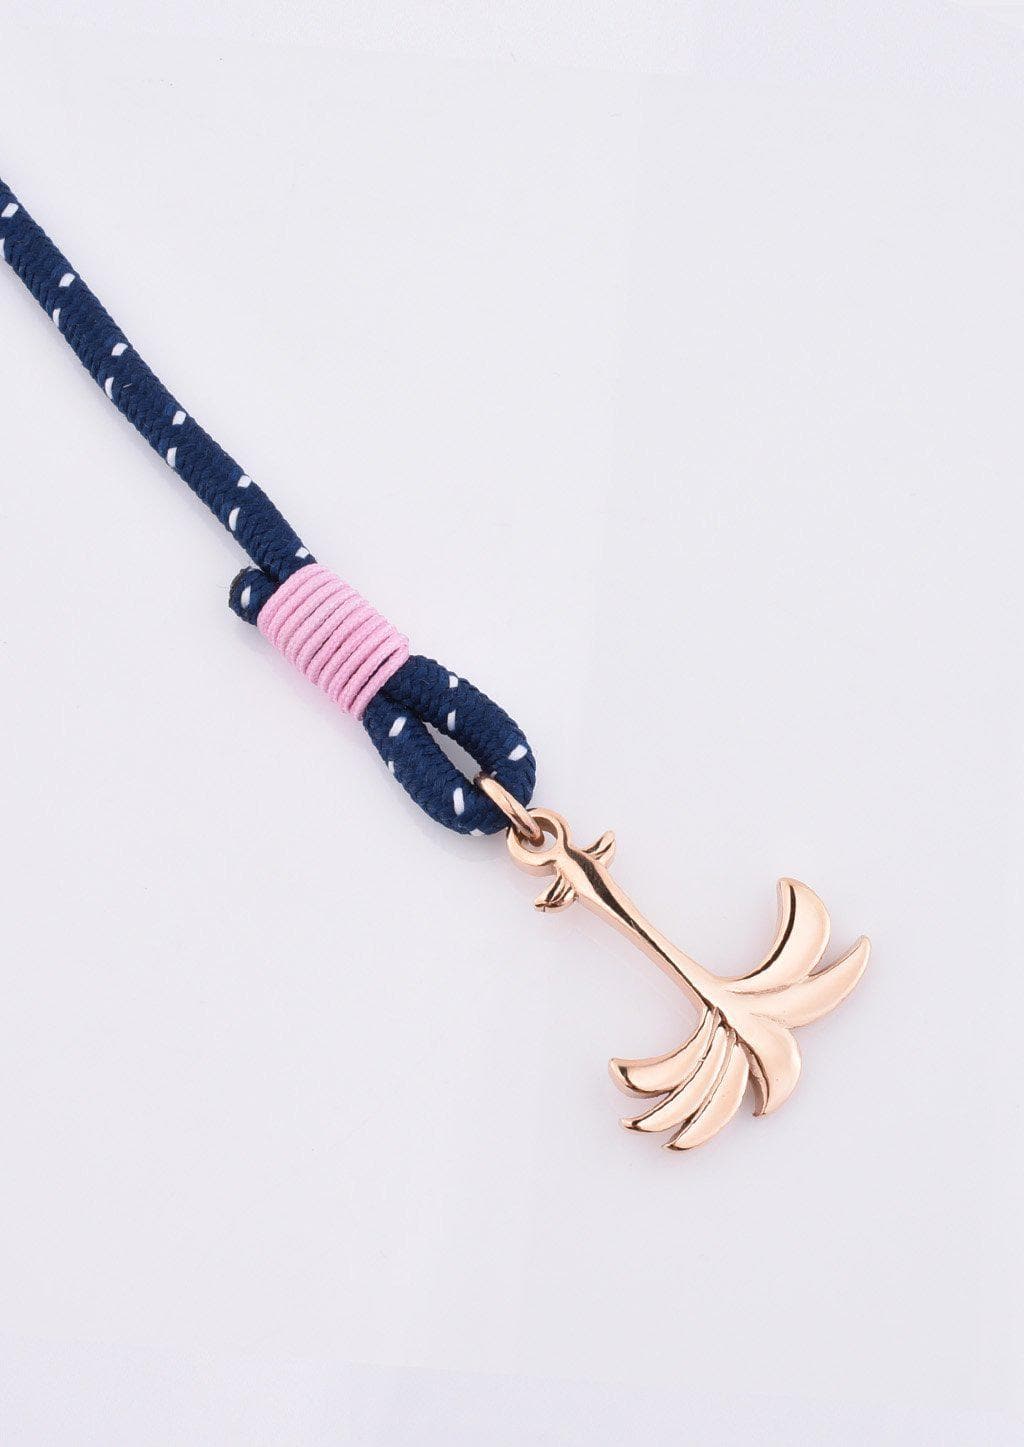 Daybreak - Single - Season two Palm anchor bracelet with pink and blue nylon band. Close up with details.